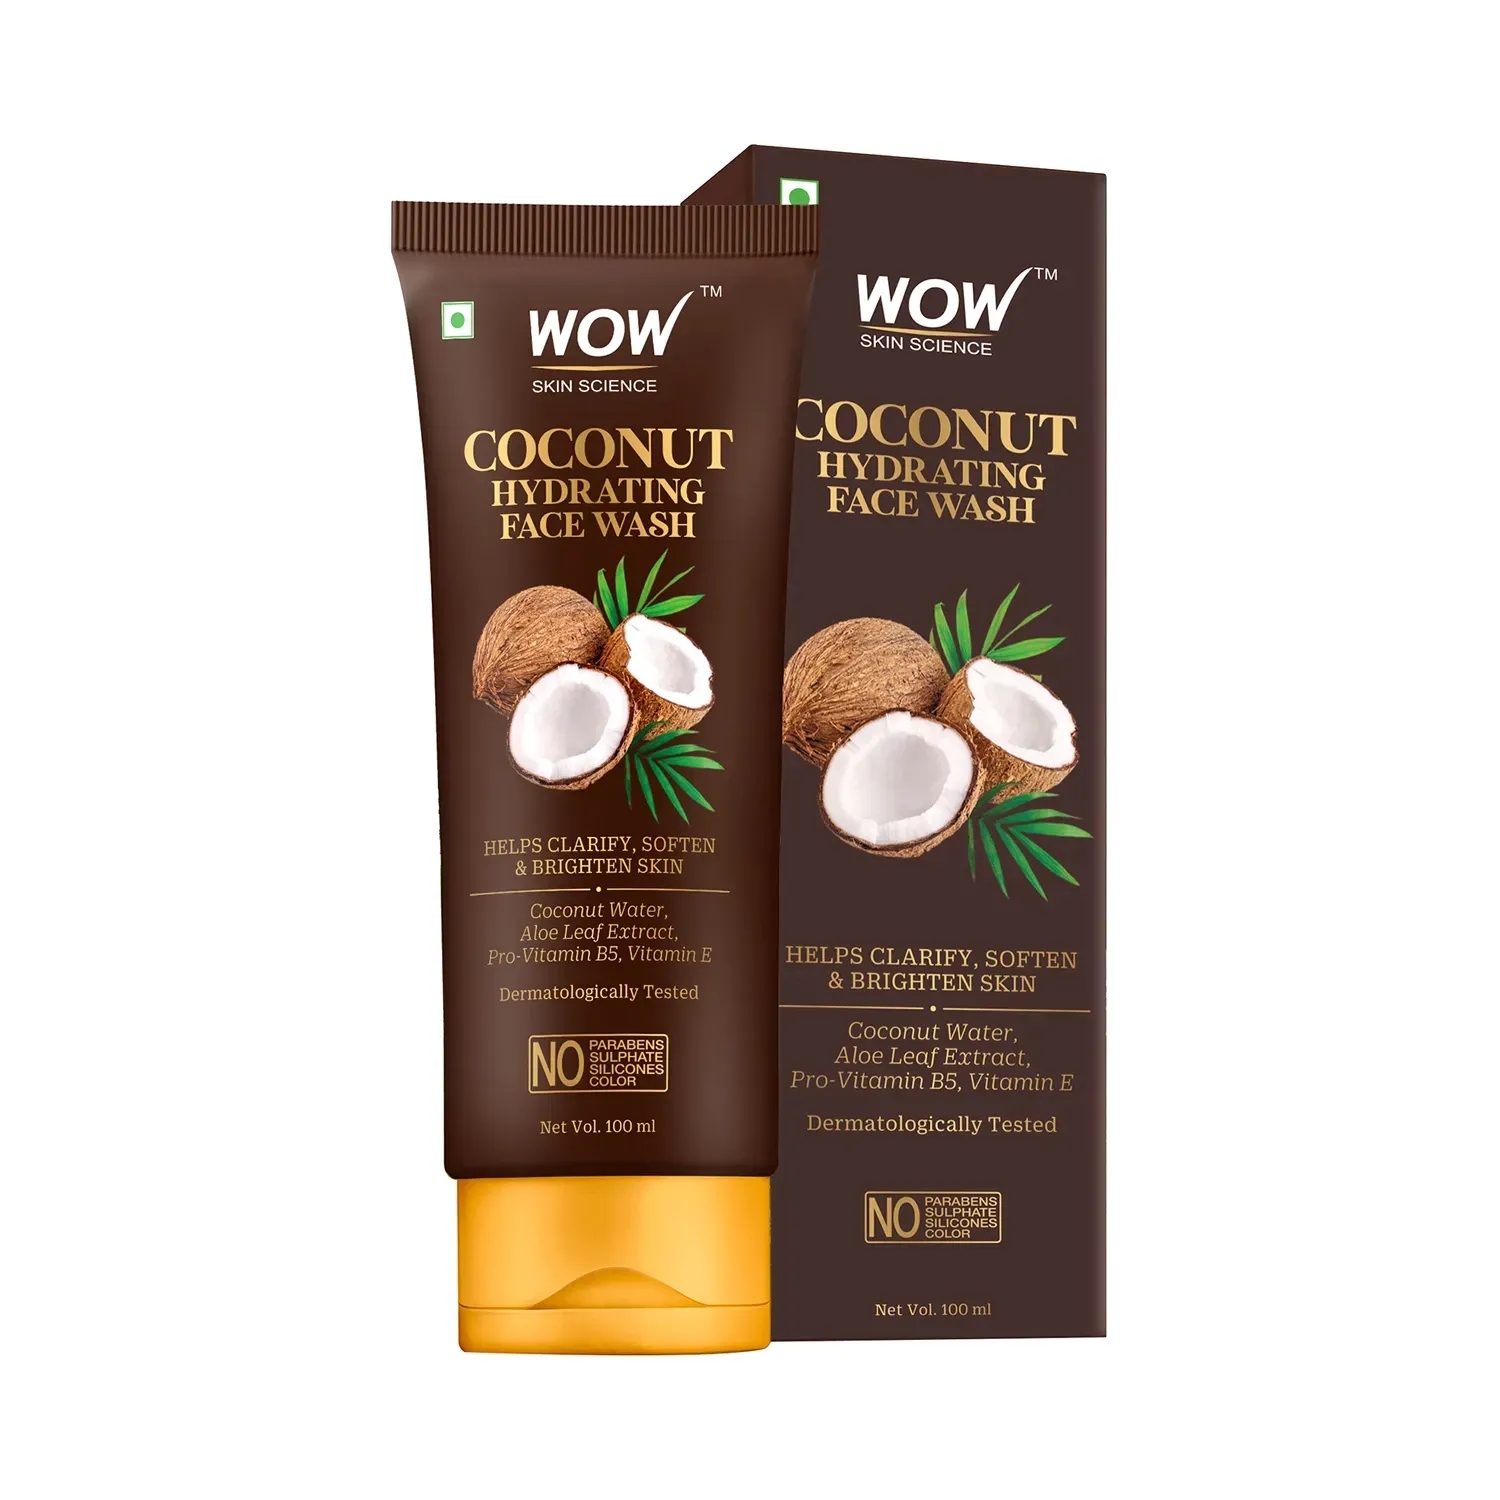 WOW SKIN SCIENCE | WOW SKIN SCIENCE Coconut Hydrating Face Wash (100ml)